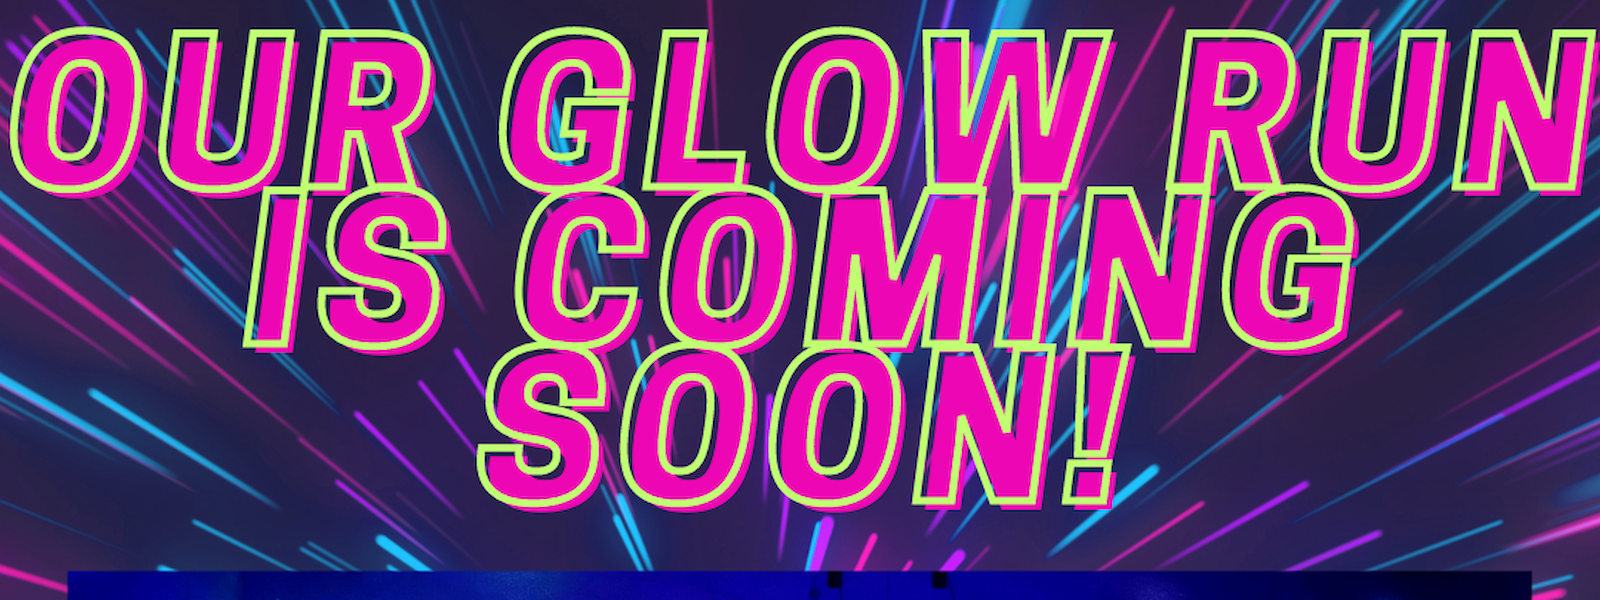 Neon background with words Our glow run is coming soon